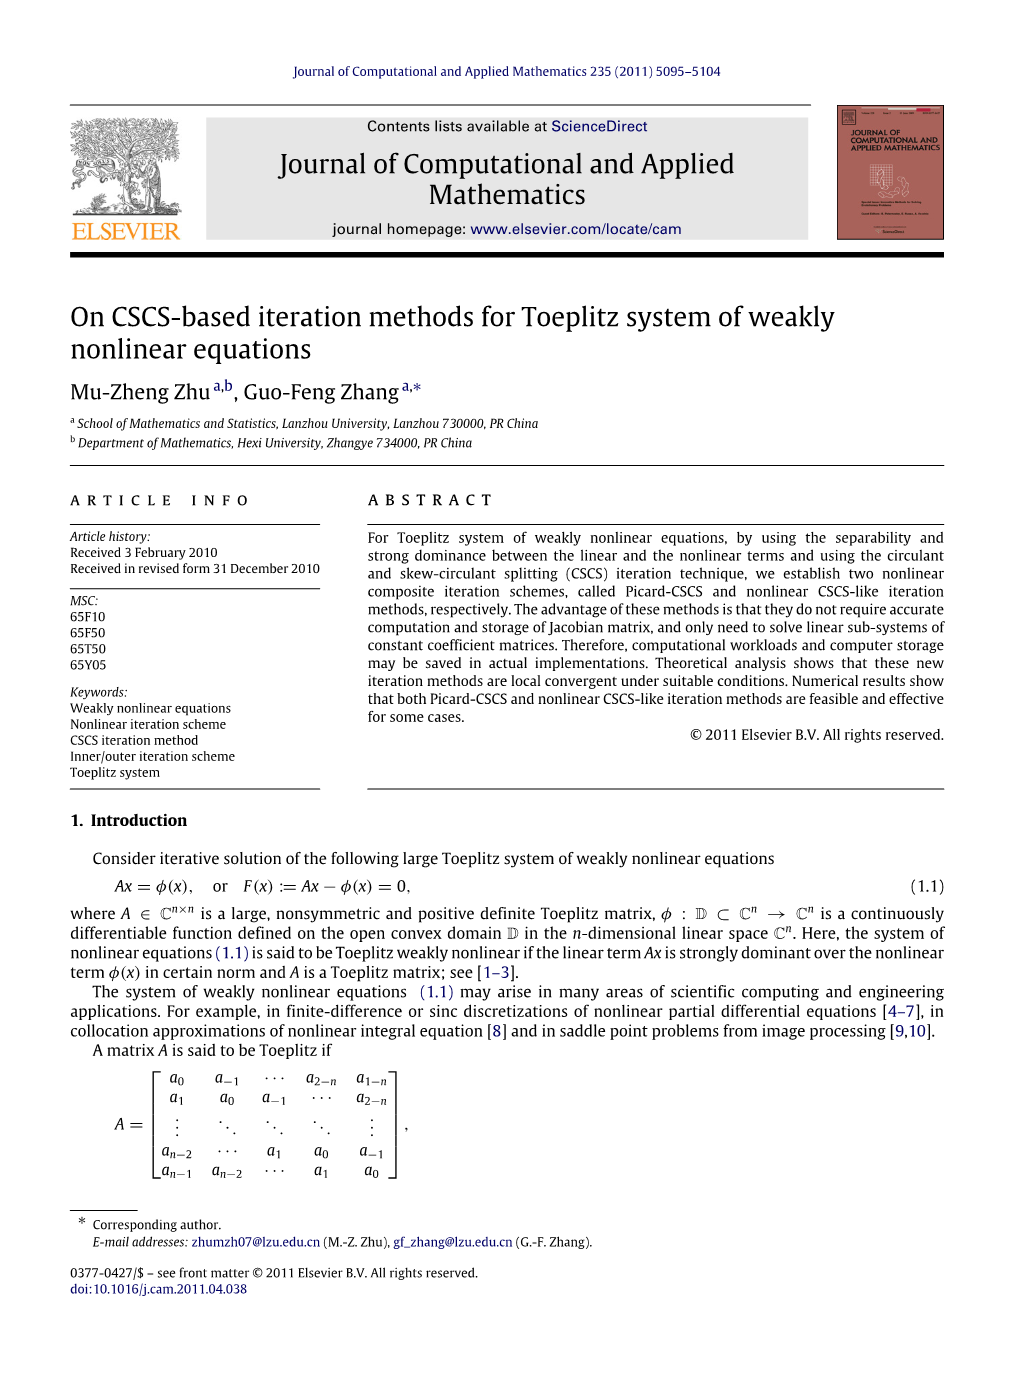 On CSCS-Based Iteration Methods for Toeplitz System of Weakly Nonlinear